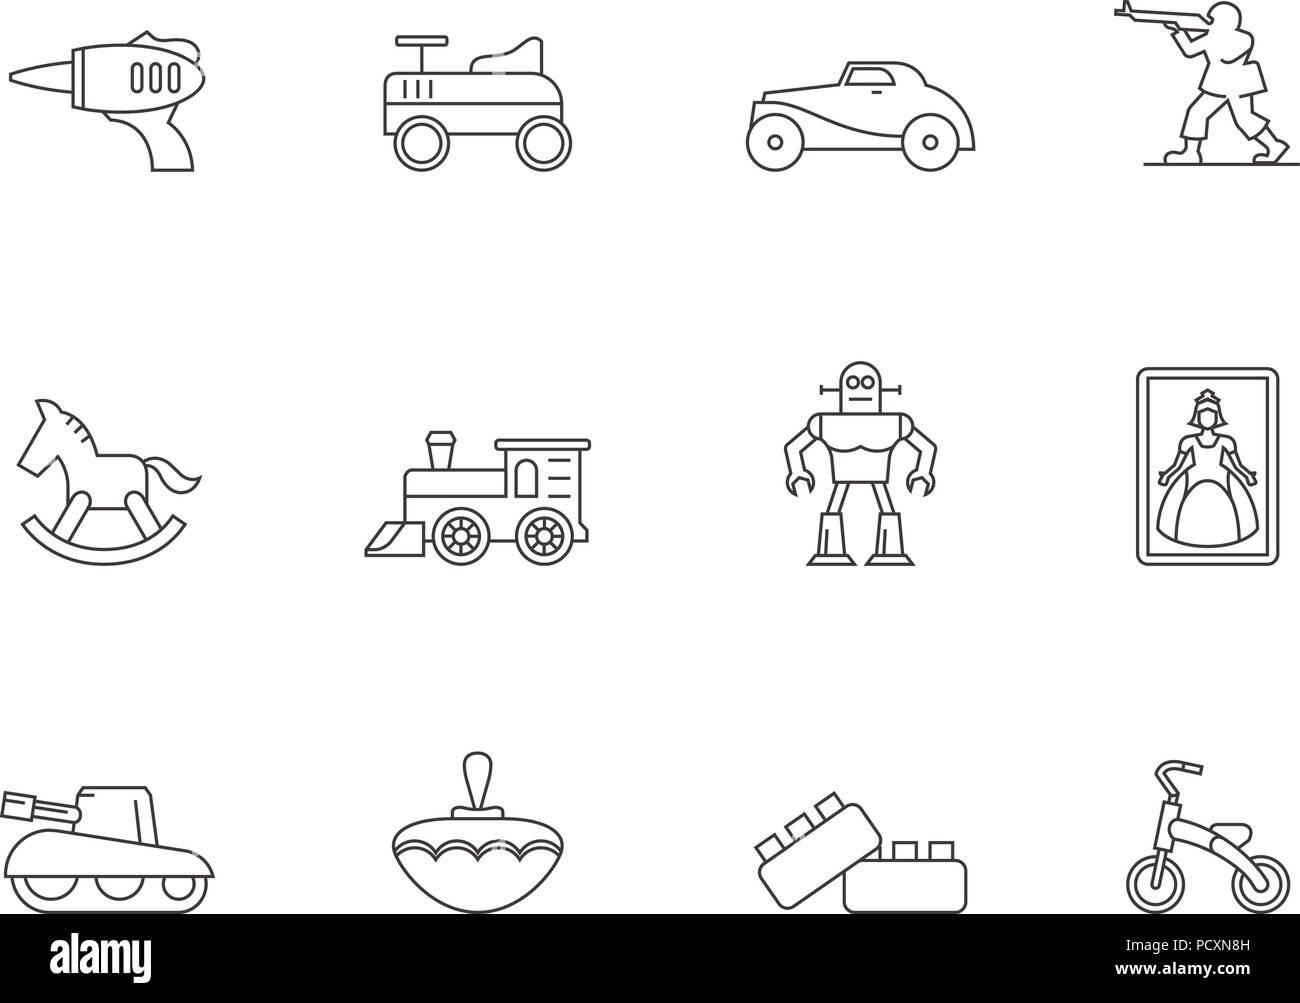 Outline Icons - Toys Stock Vector